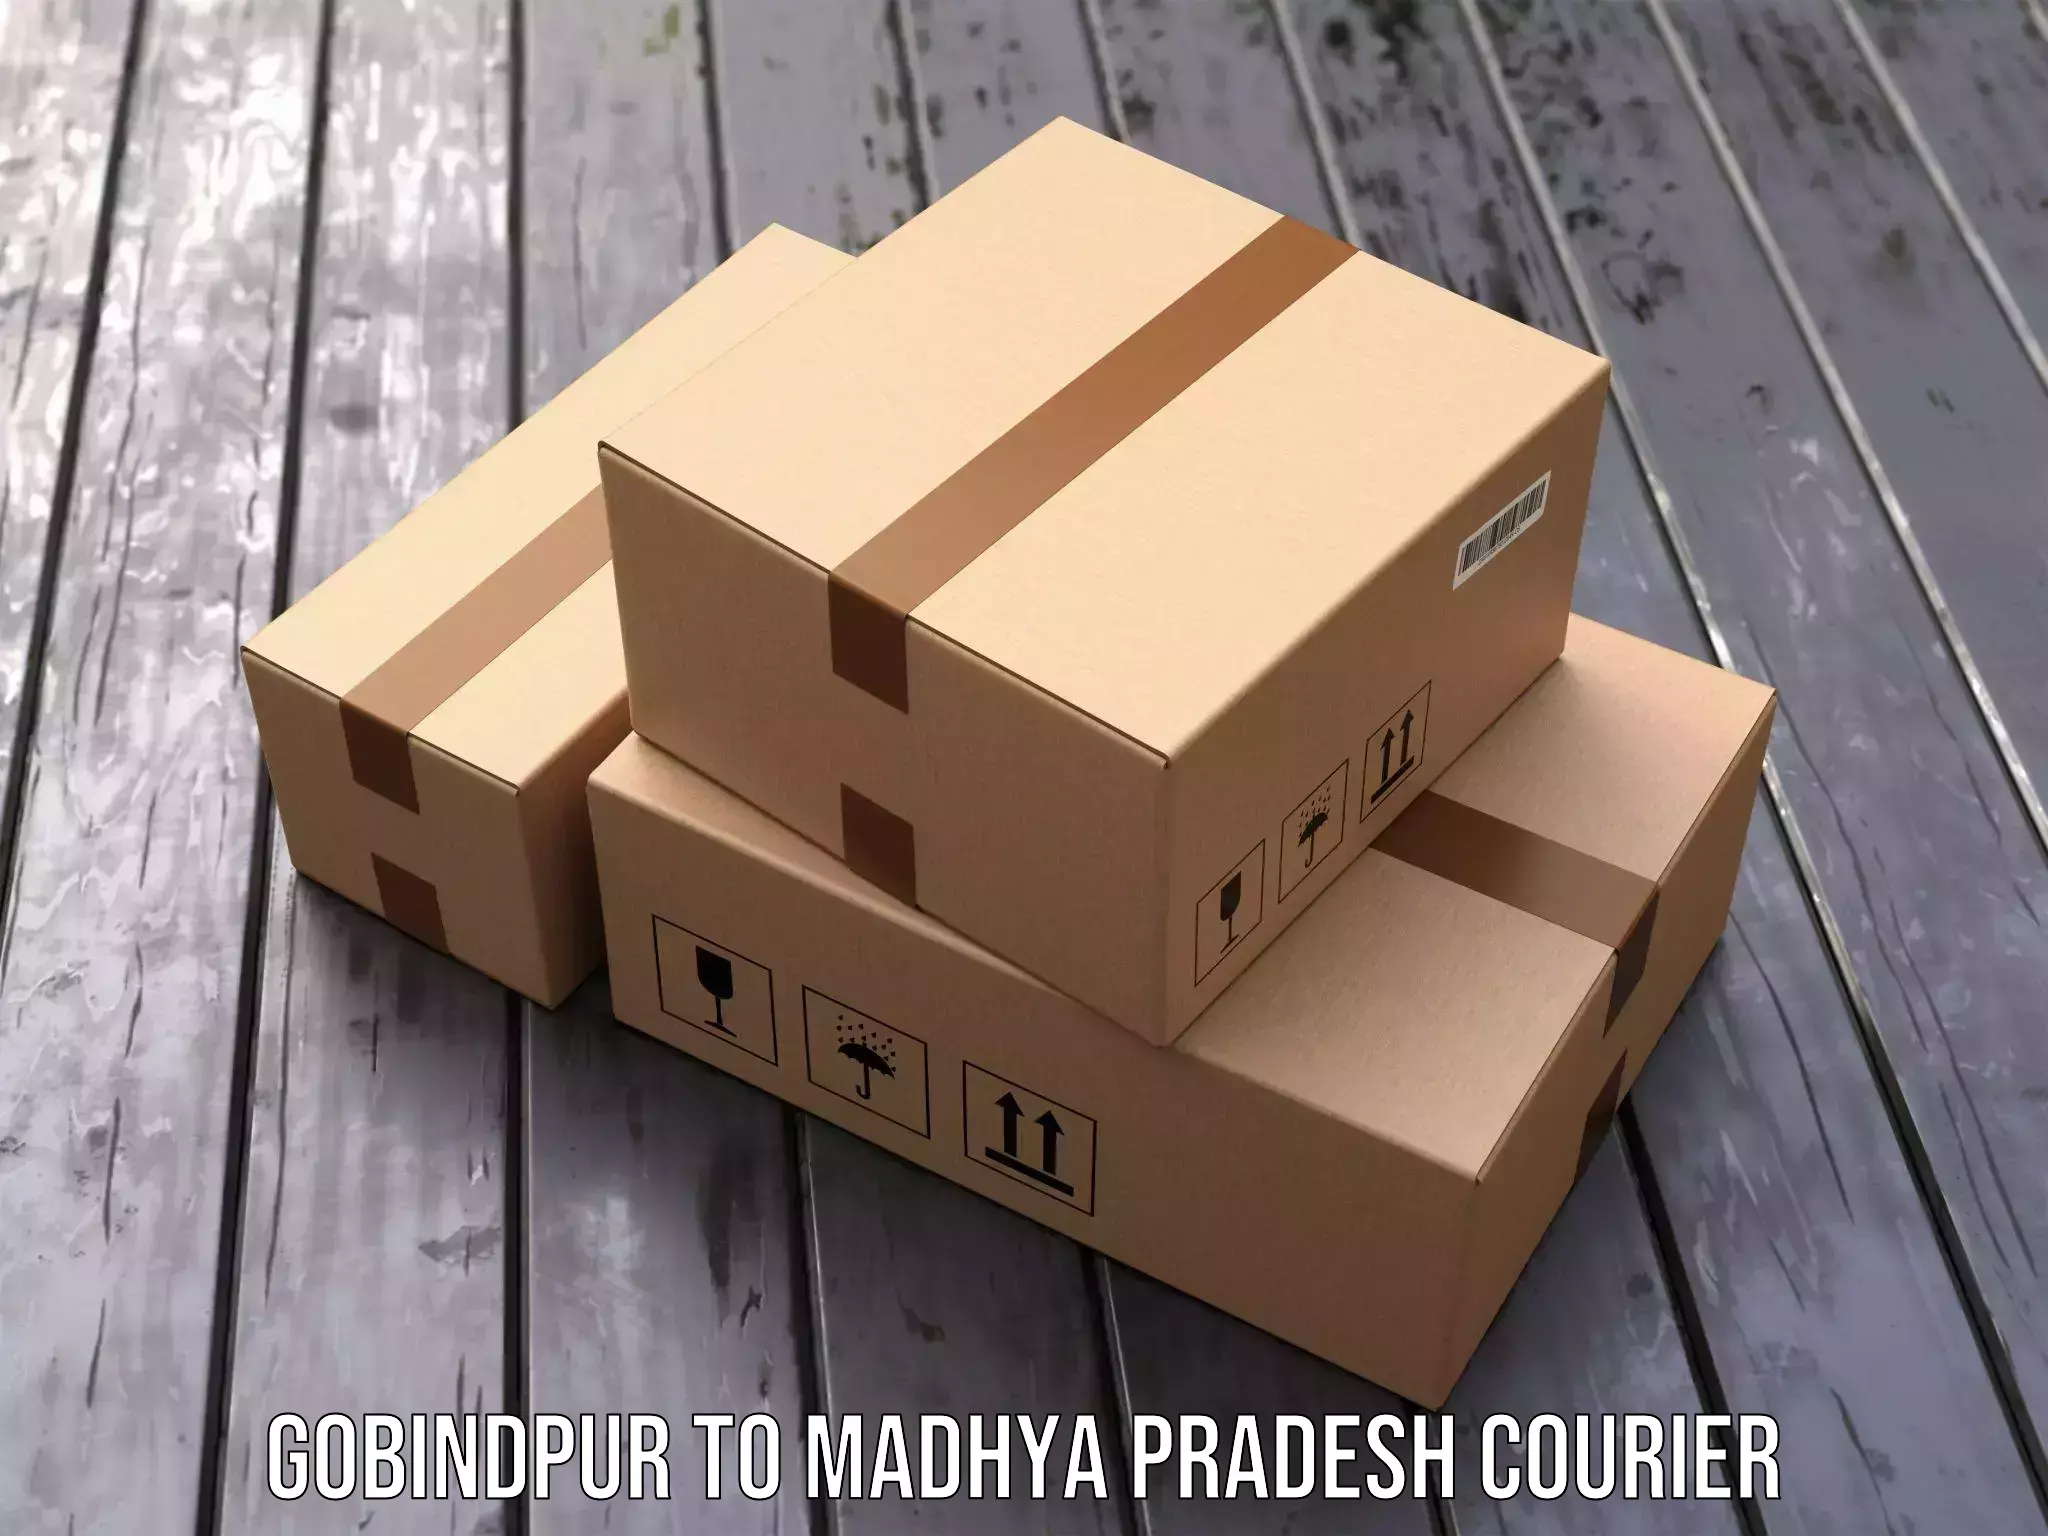 State-of-the-art courier technology Gobindpur to Kesali